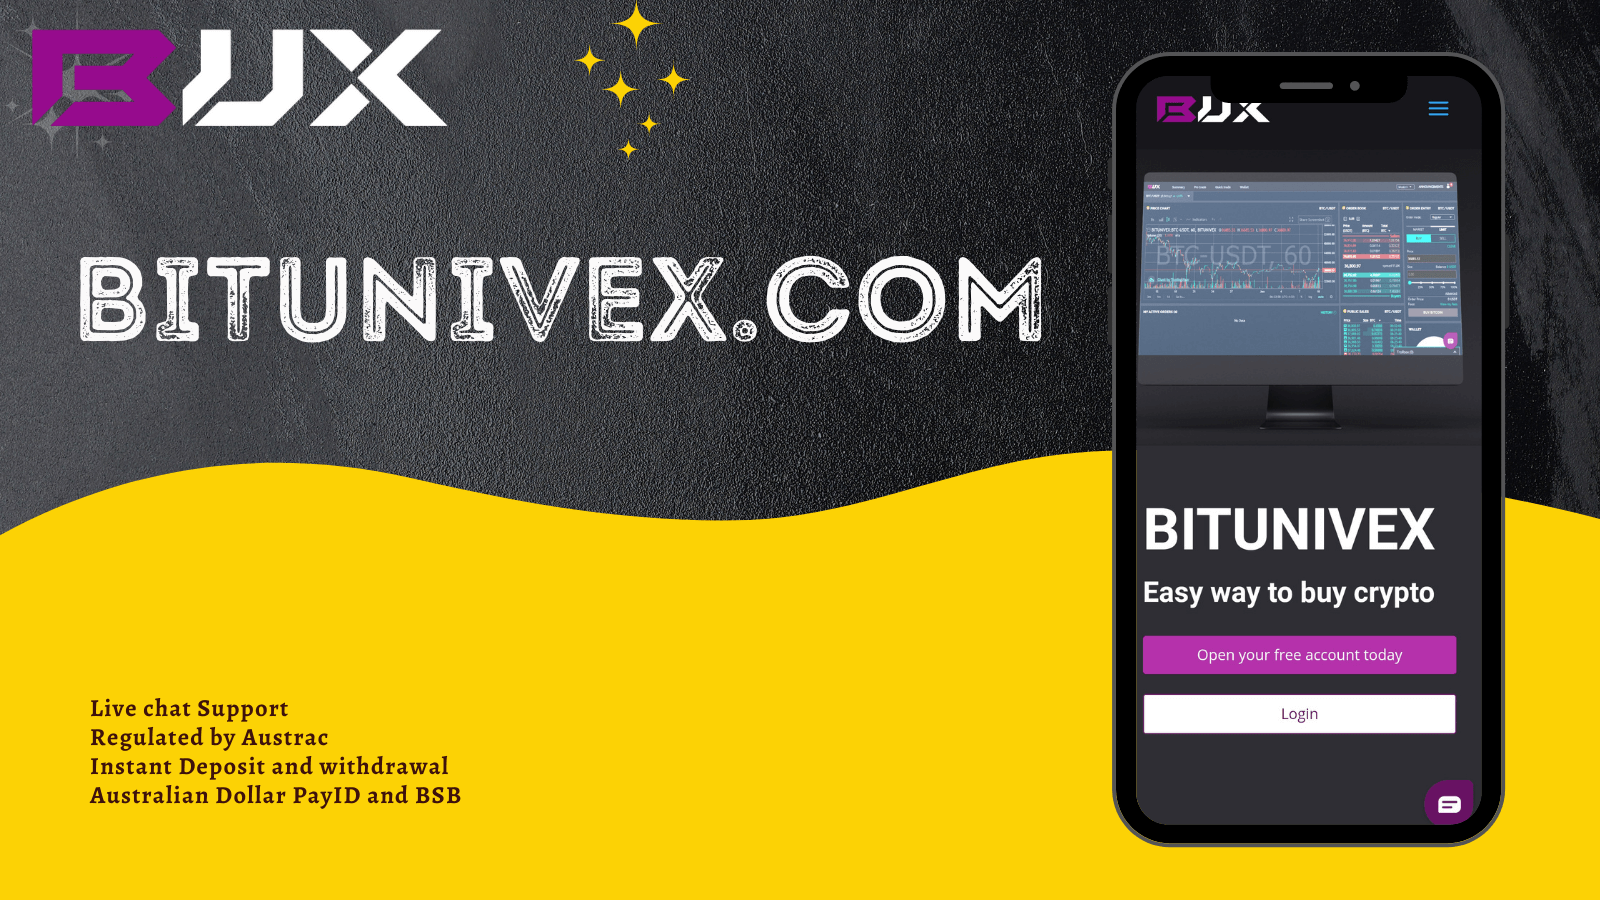 Bitunivex.com Is Now Connected To The Australian PAYID System